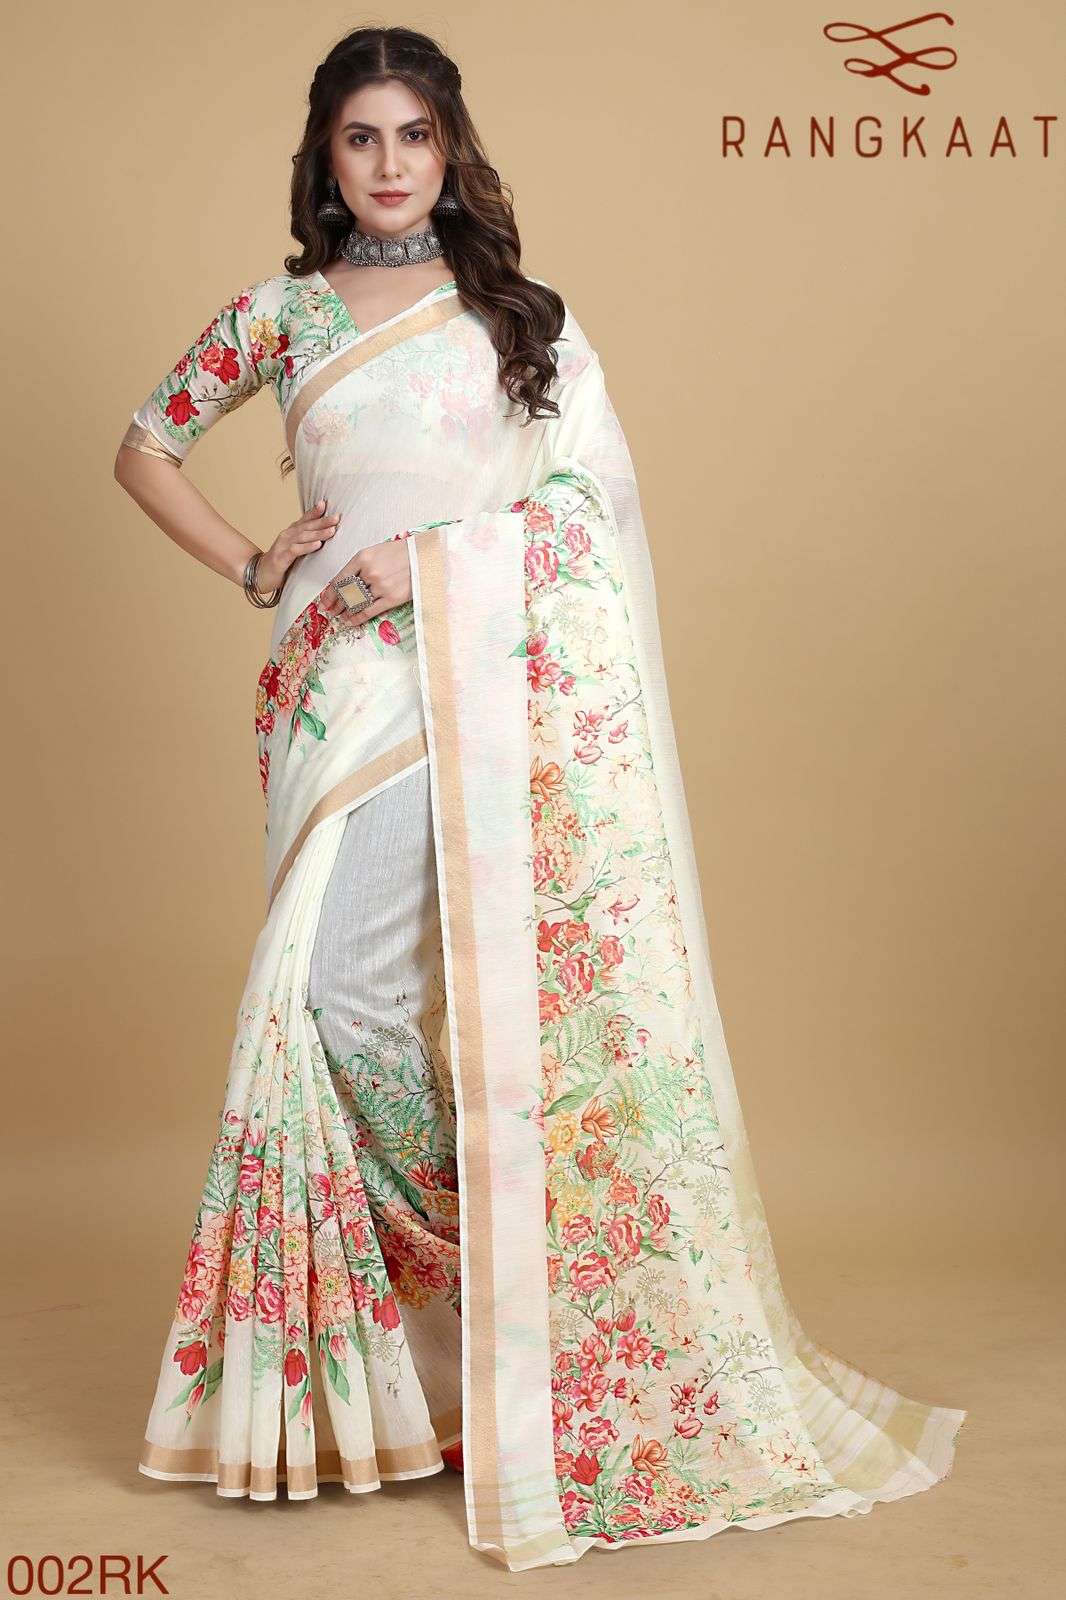 rangkaat 001-006 designer floral printed women saree with blouse peice collection 